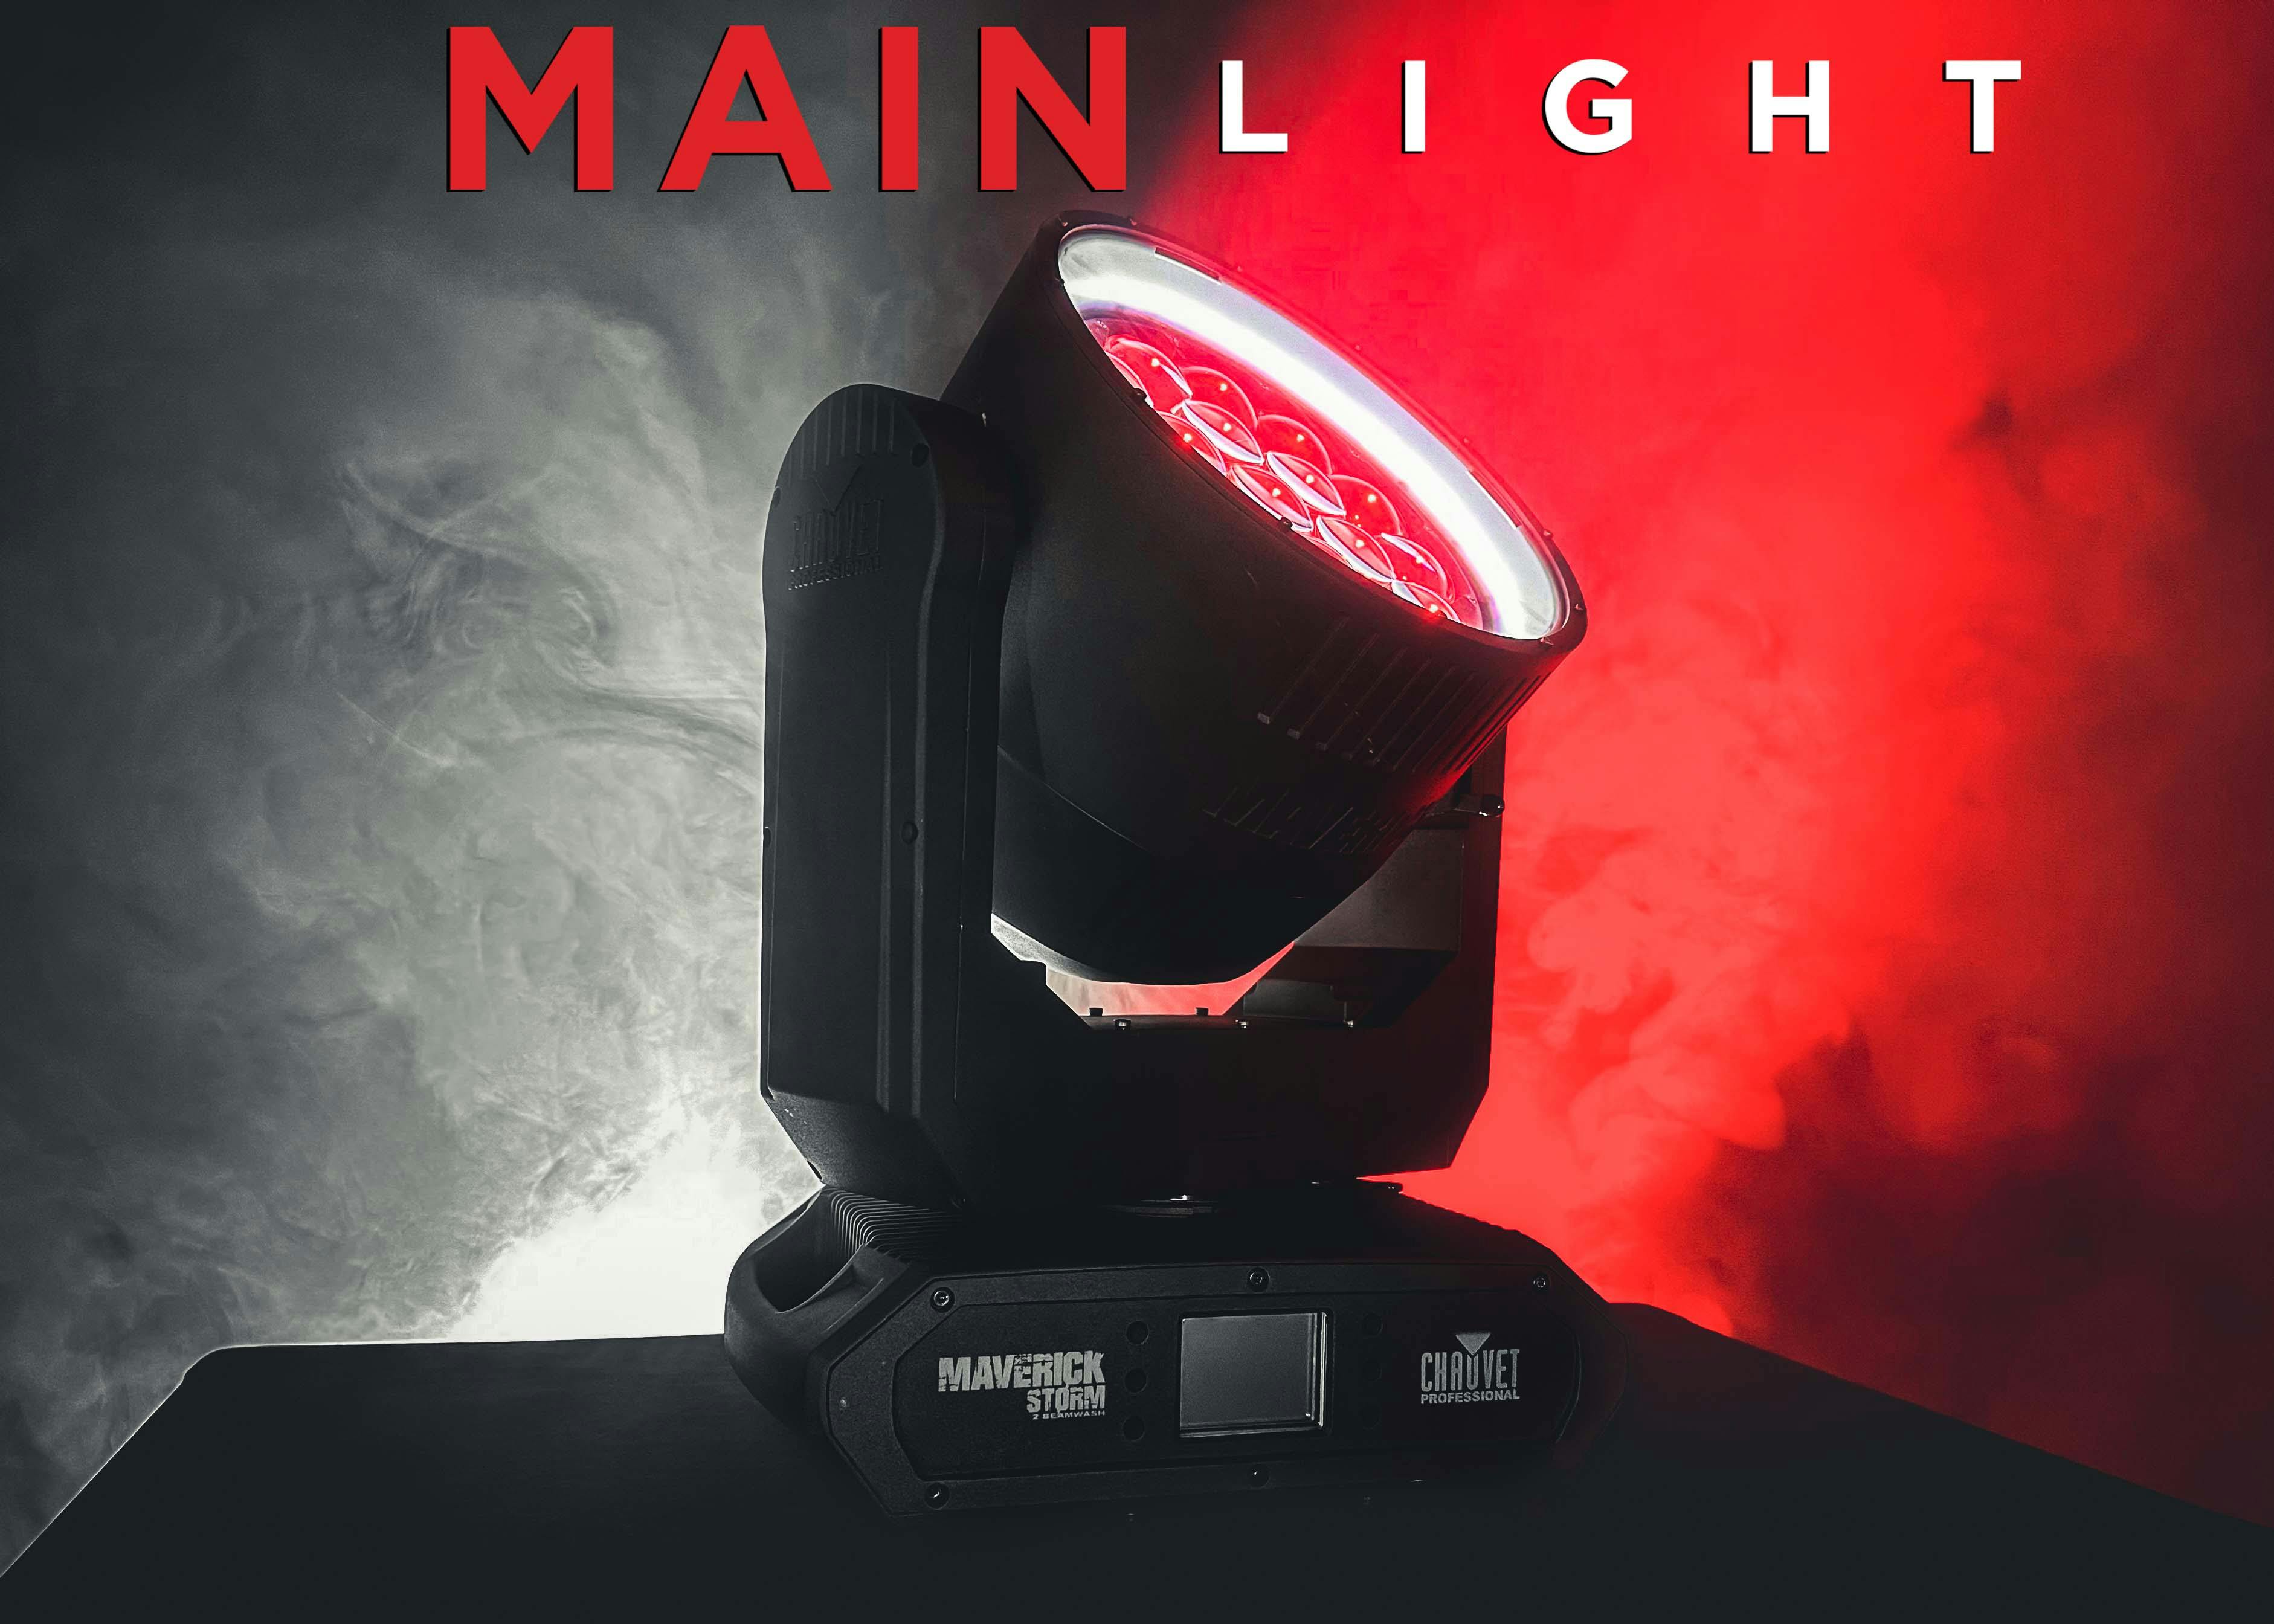 Chauvet Maverick Storm 2 BeamWash on top of a case shining red and white light in front of a back ground of haze.